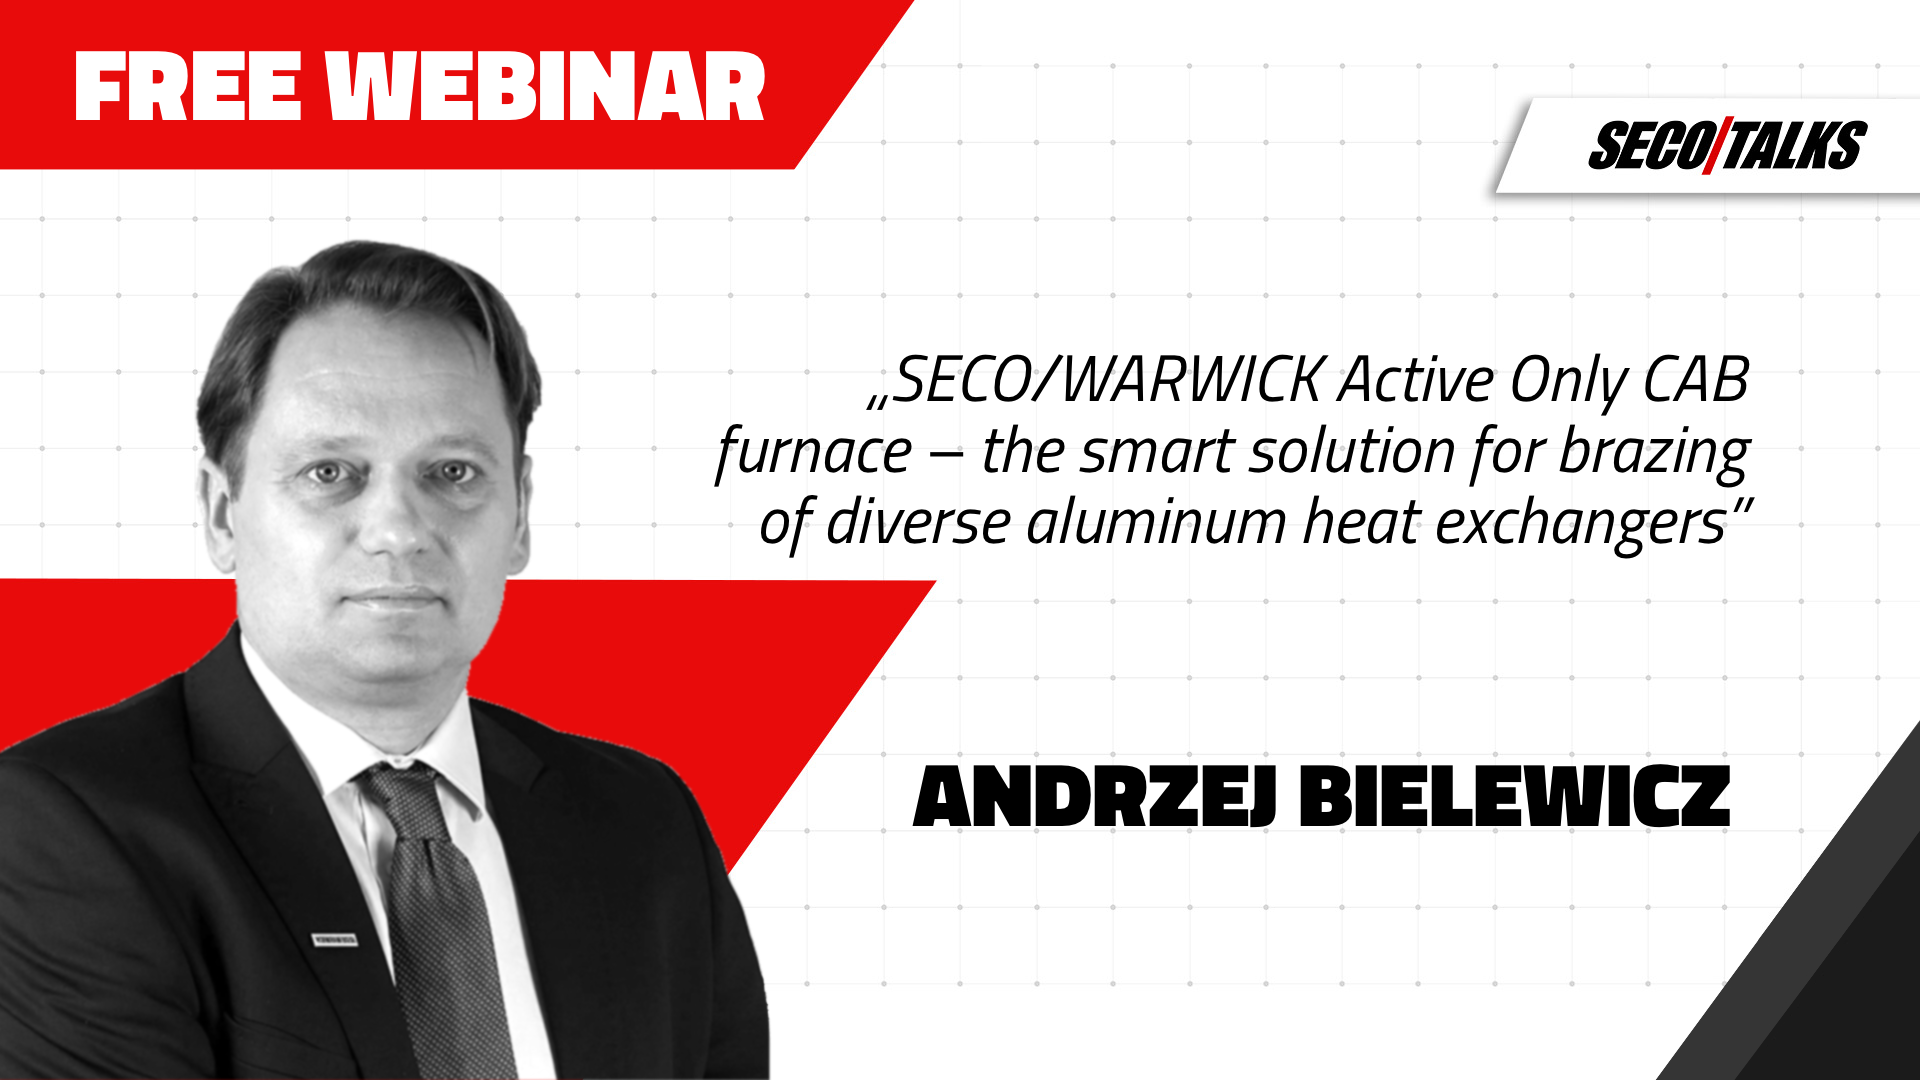 SECO/WARWICK Active Only CAB furnace - the smart solution for brazing of diverse aluminum heat exchangers